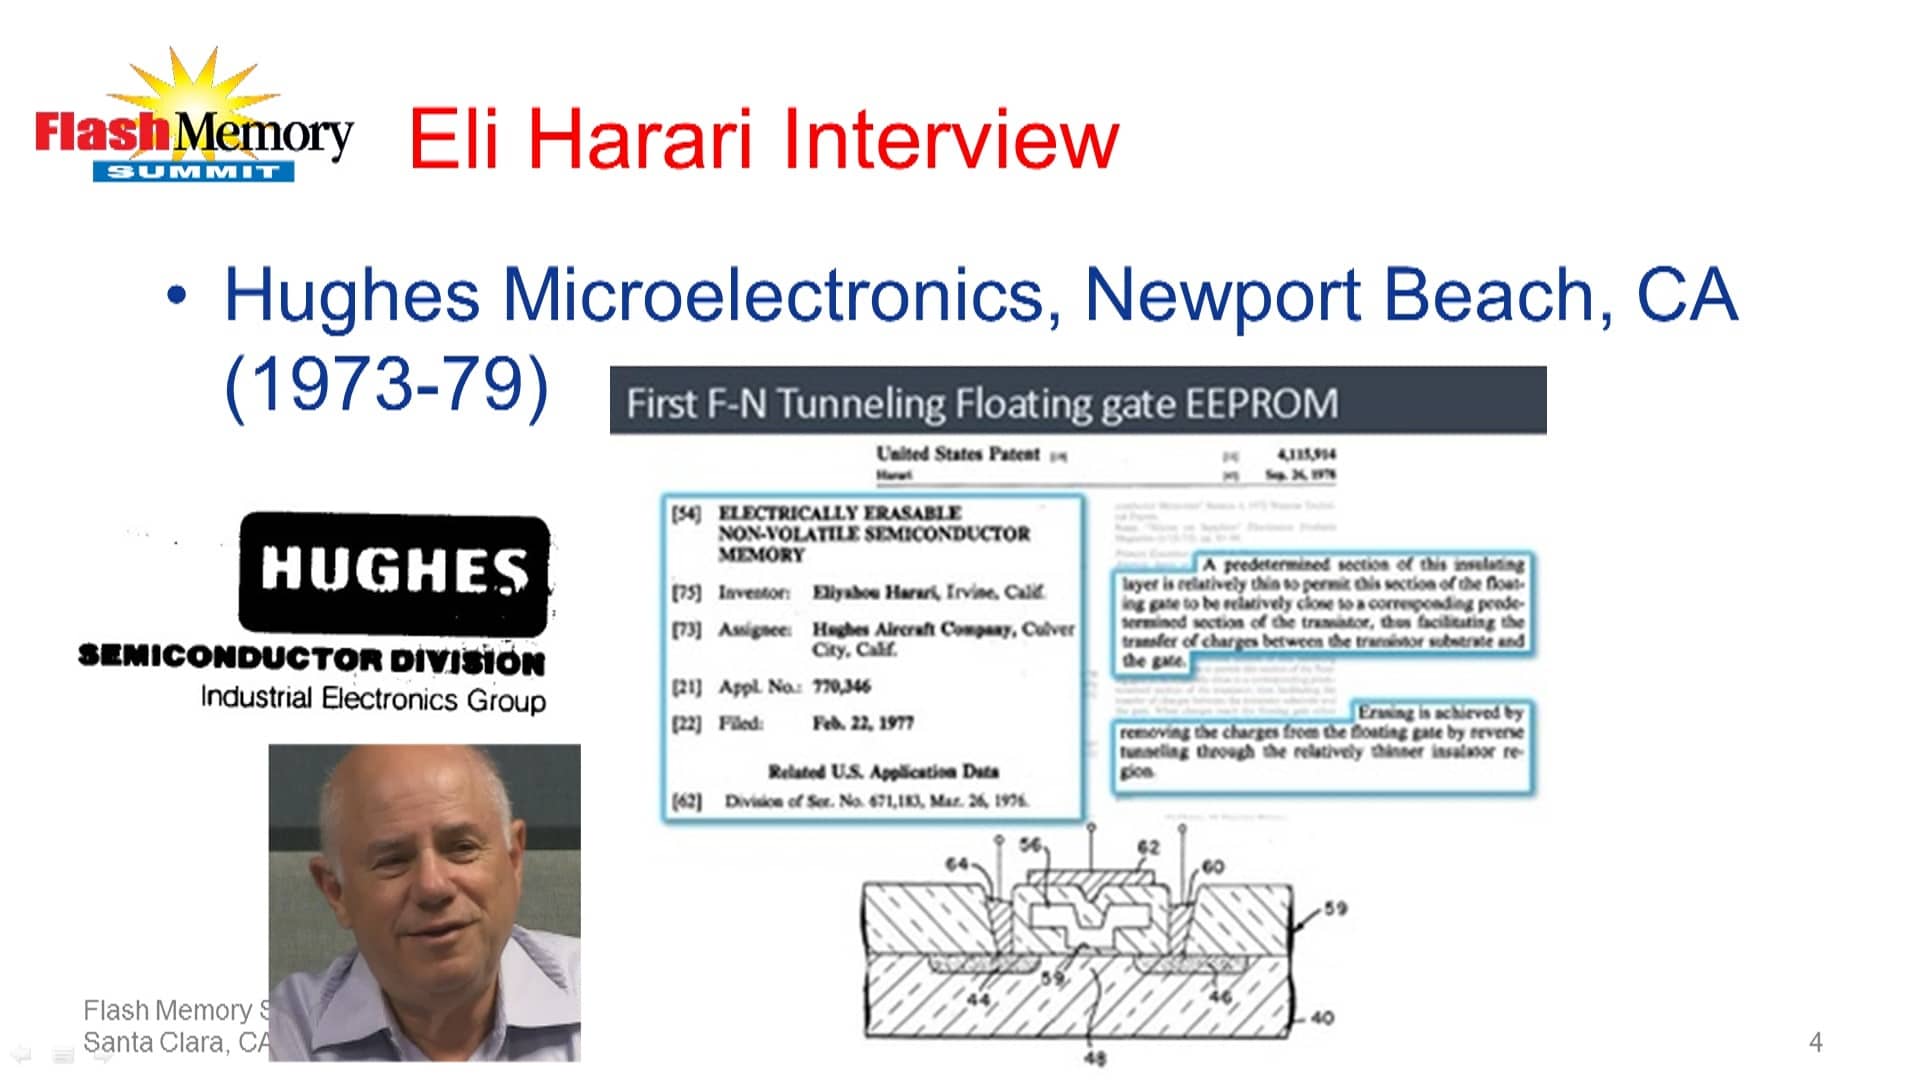 Eli Harari reflects on his time at Hughes Microelectronics.